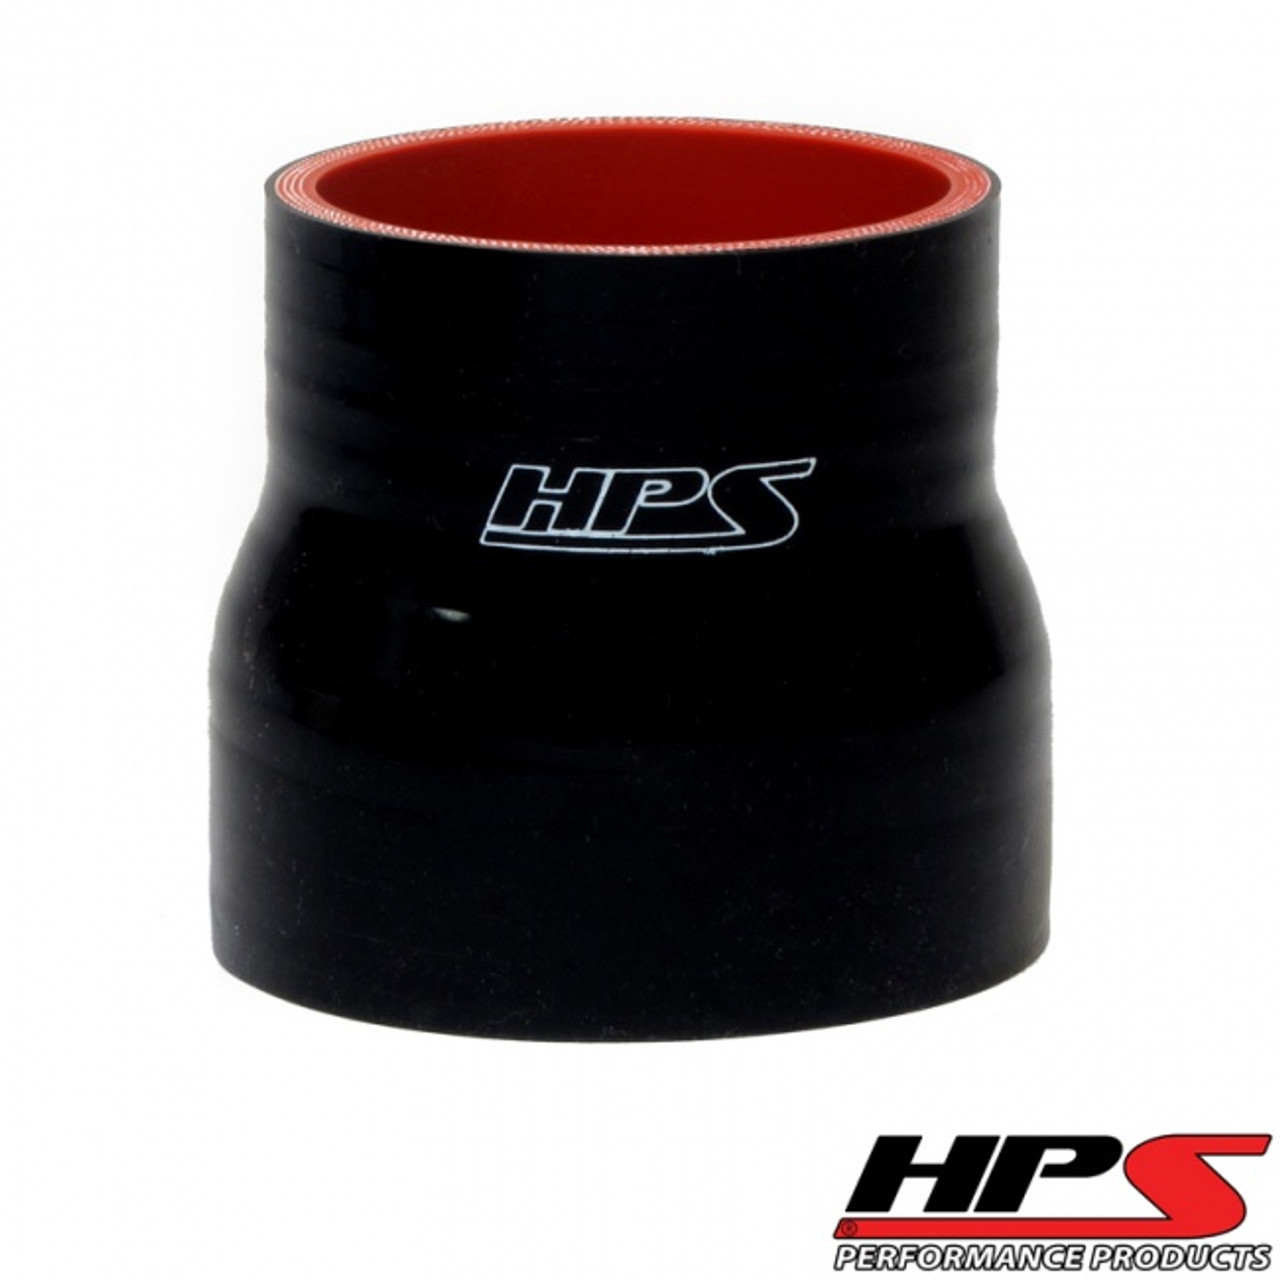 HPS 4 Ply Reinforced Straight Silicone Hose Reducer/Adapter 2.75" x 3" ID Black